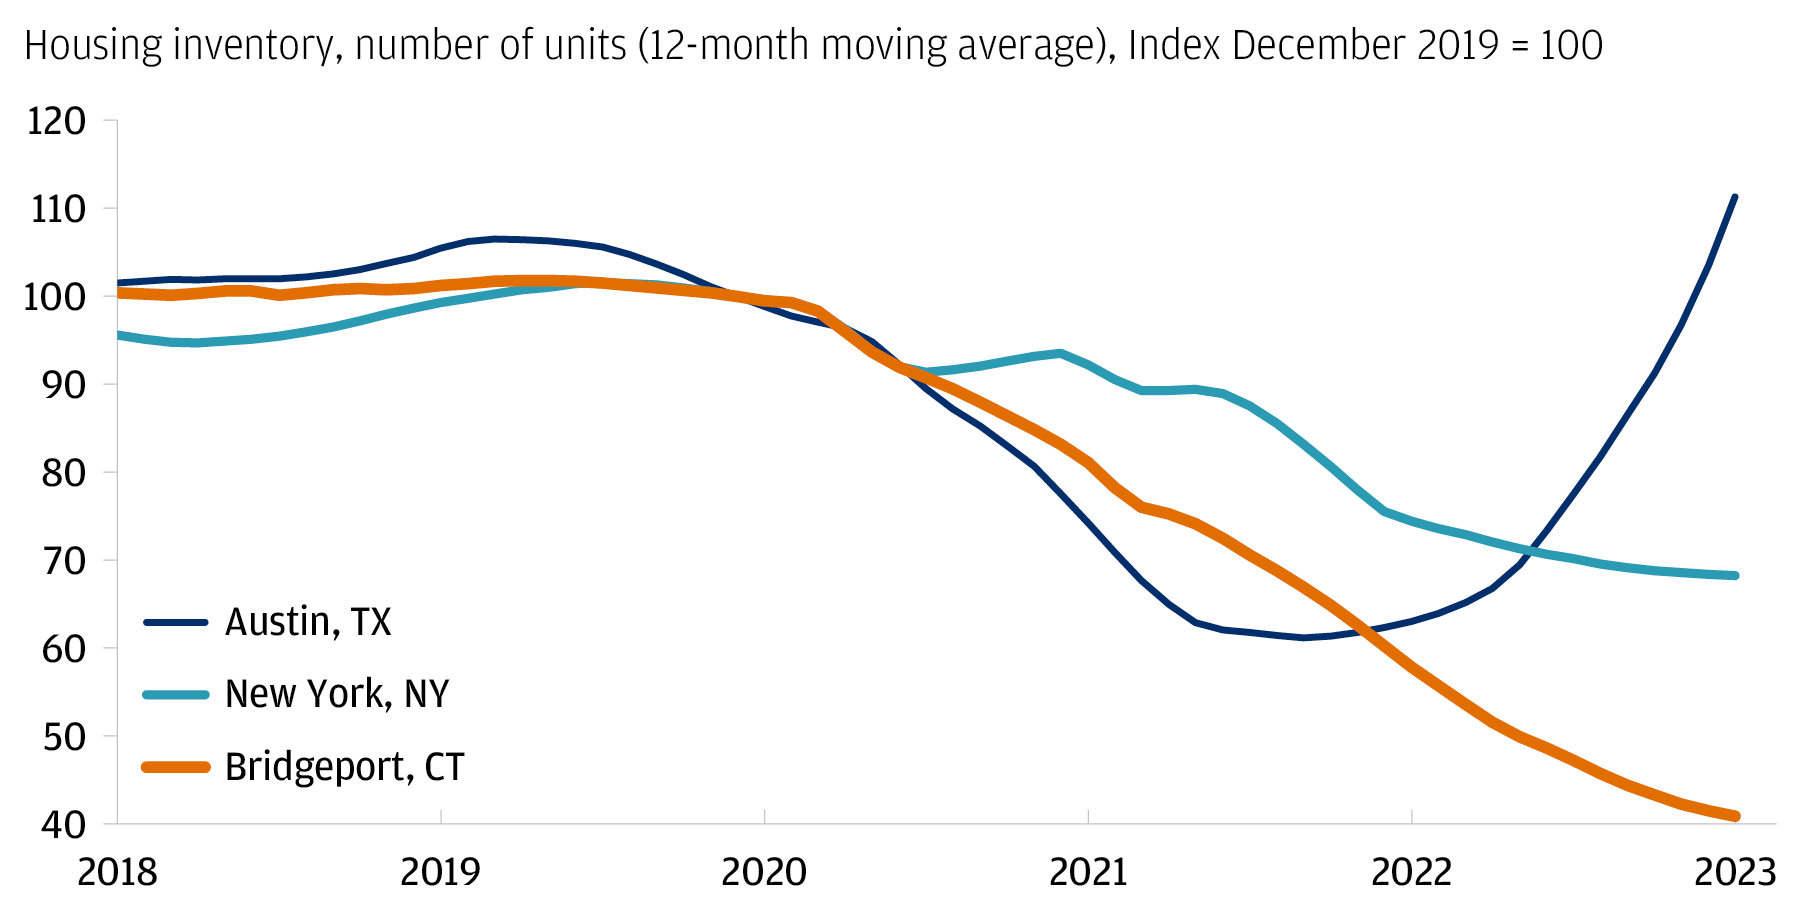 This line graph shows housing inventory in Austin, Texas, New York City, New York and Bridgeport, Connecticut (12 month rolling average, indexed December 2019 = 100). 